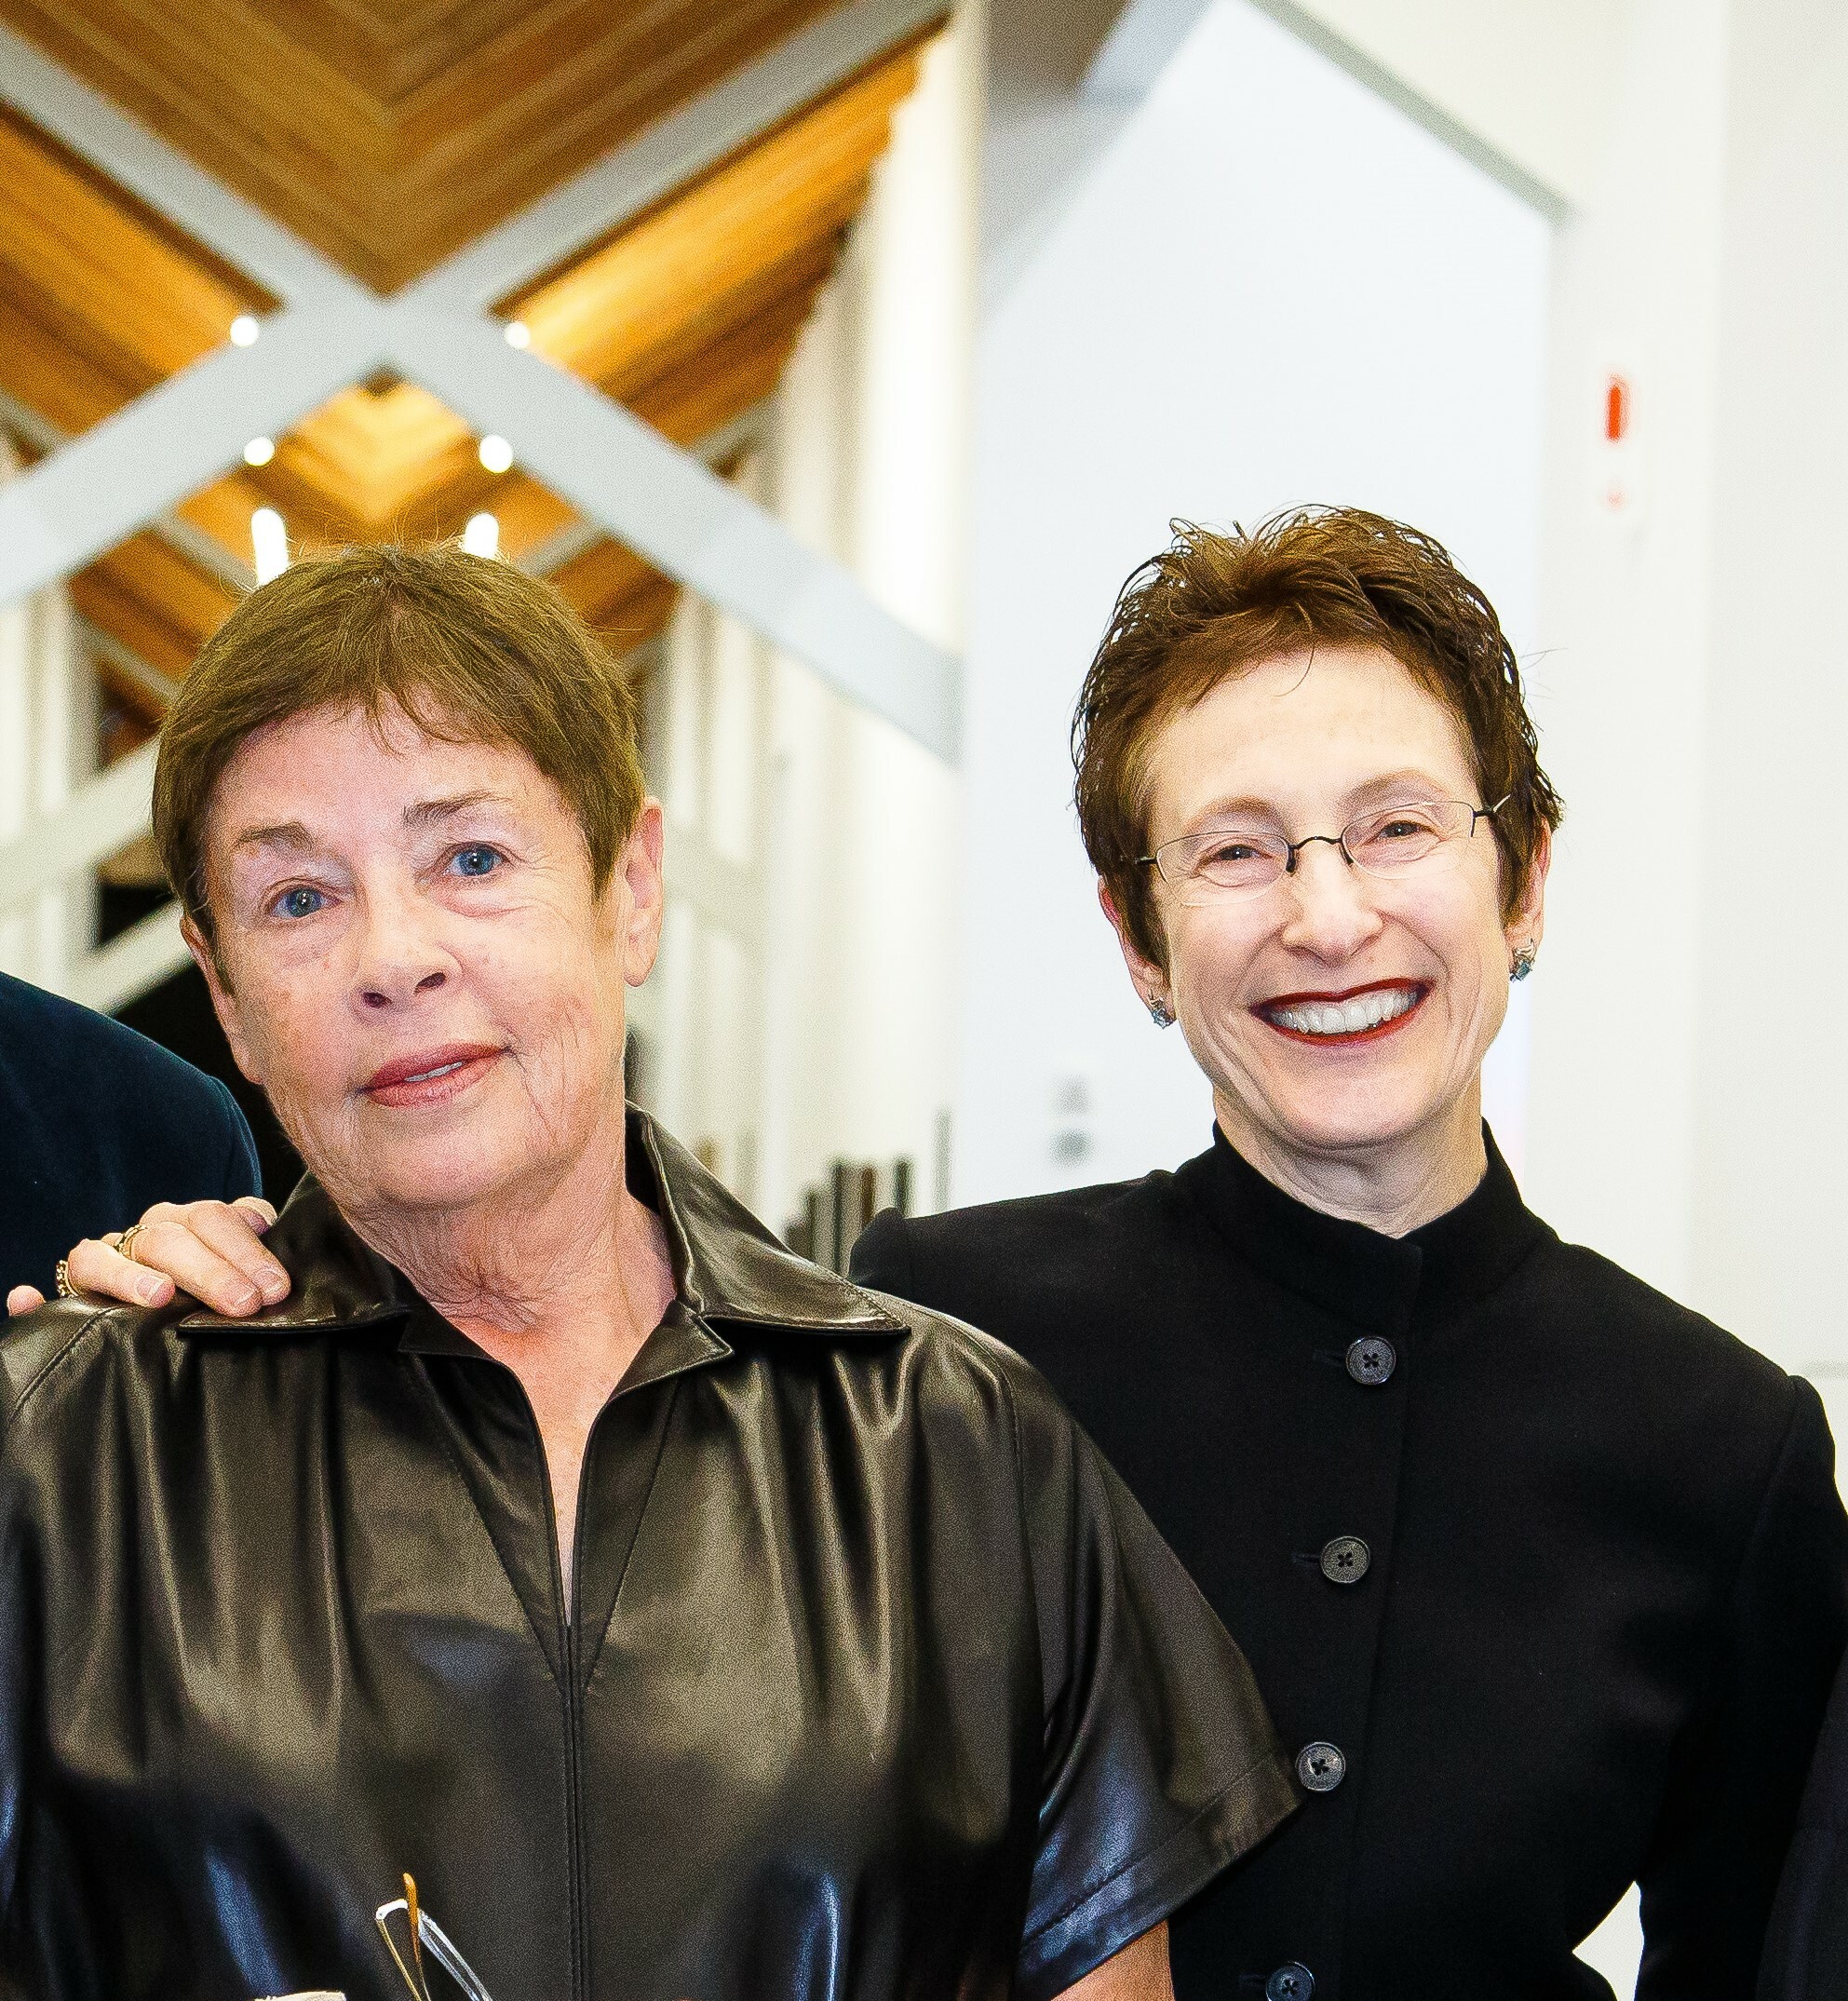 Artist Jennifer Bartlett with Terrie Sultan at the Parrish Art Museum in 2014.